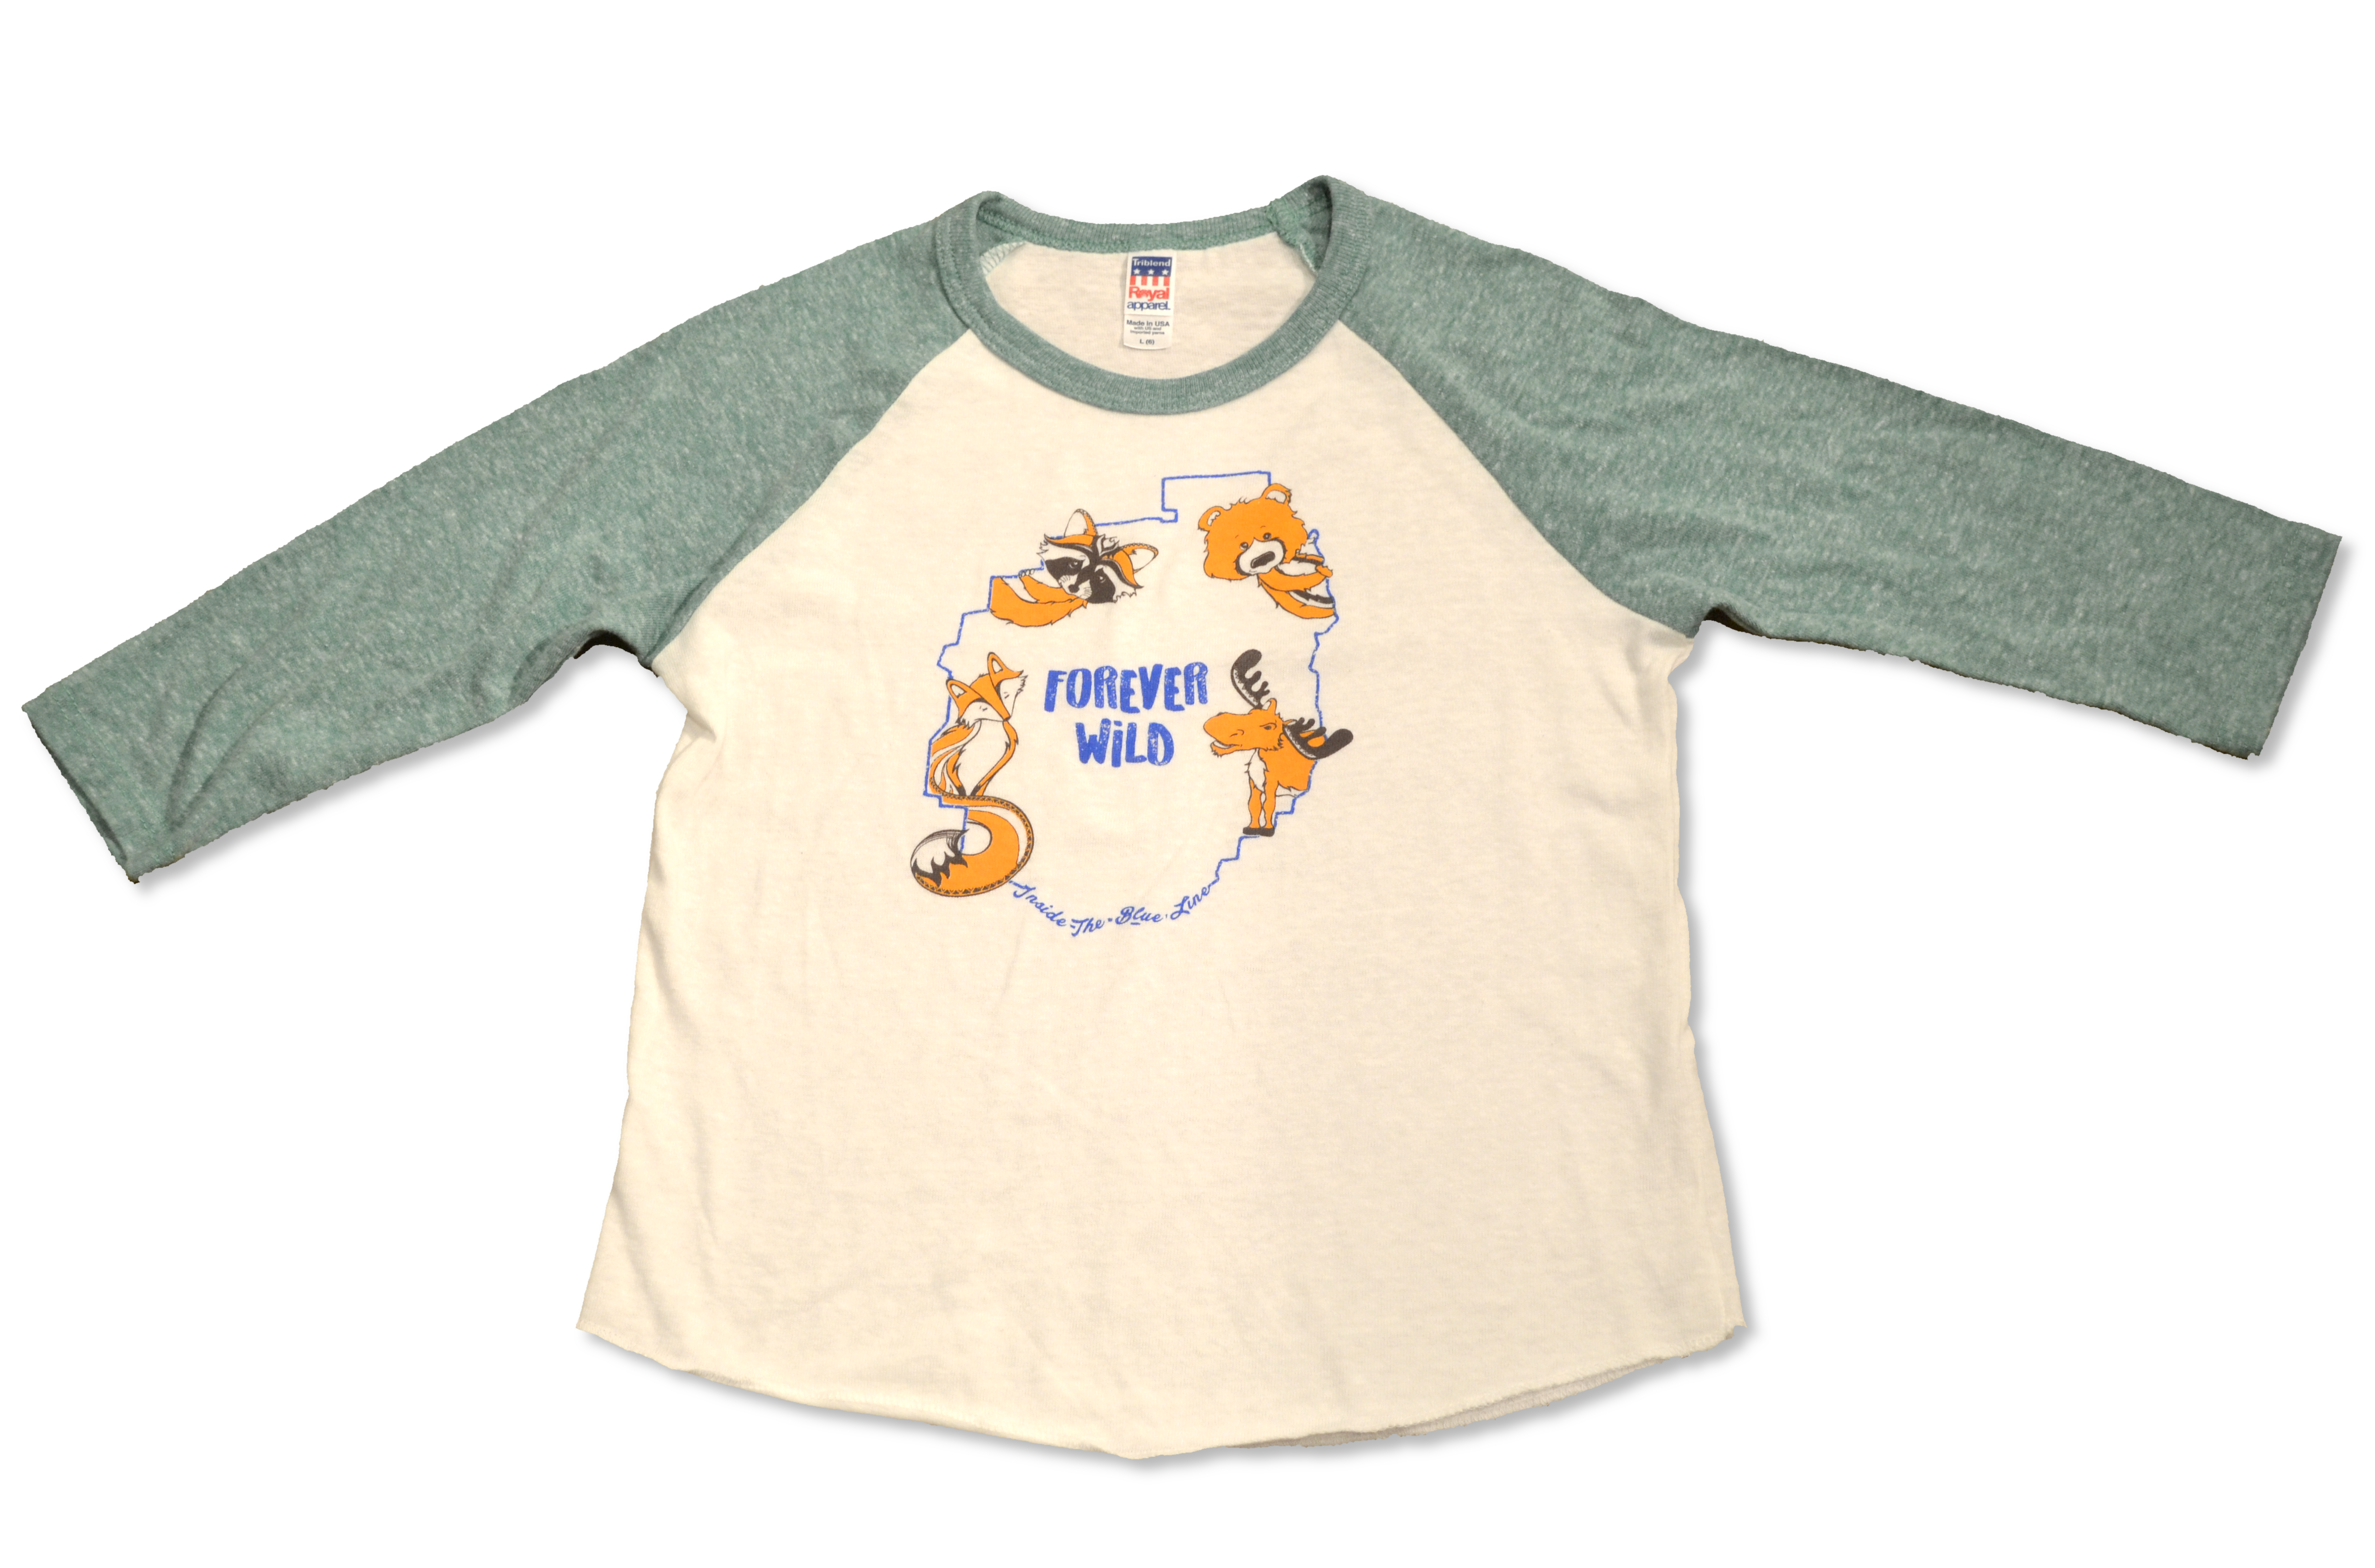 The Forever Wild Tee - Toddler T-Shirt Green